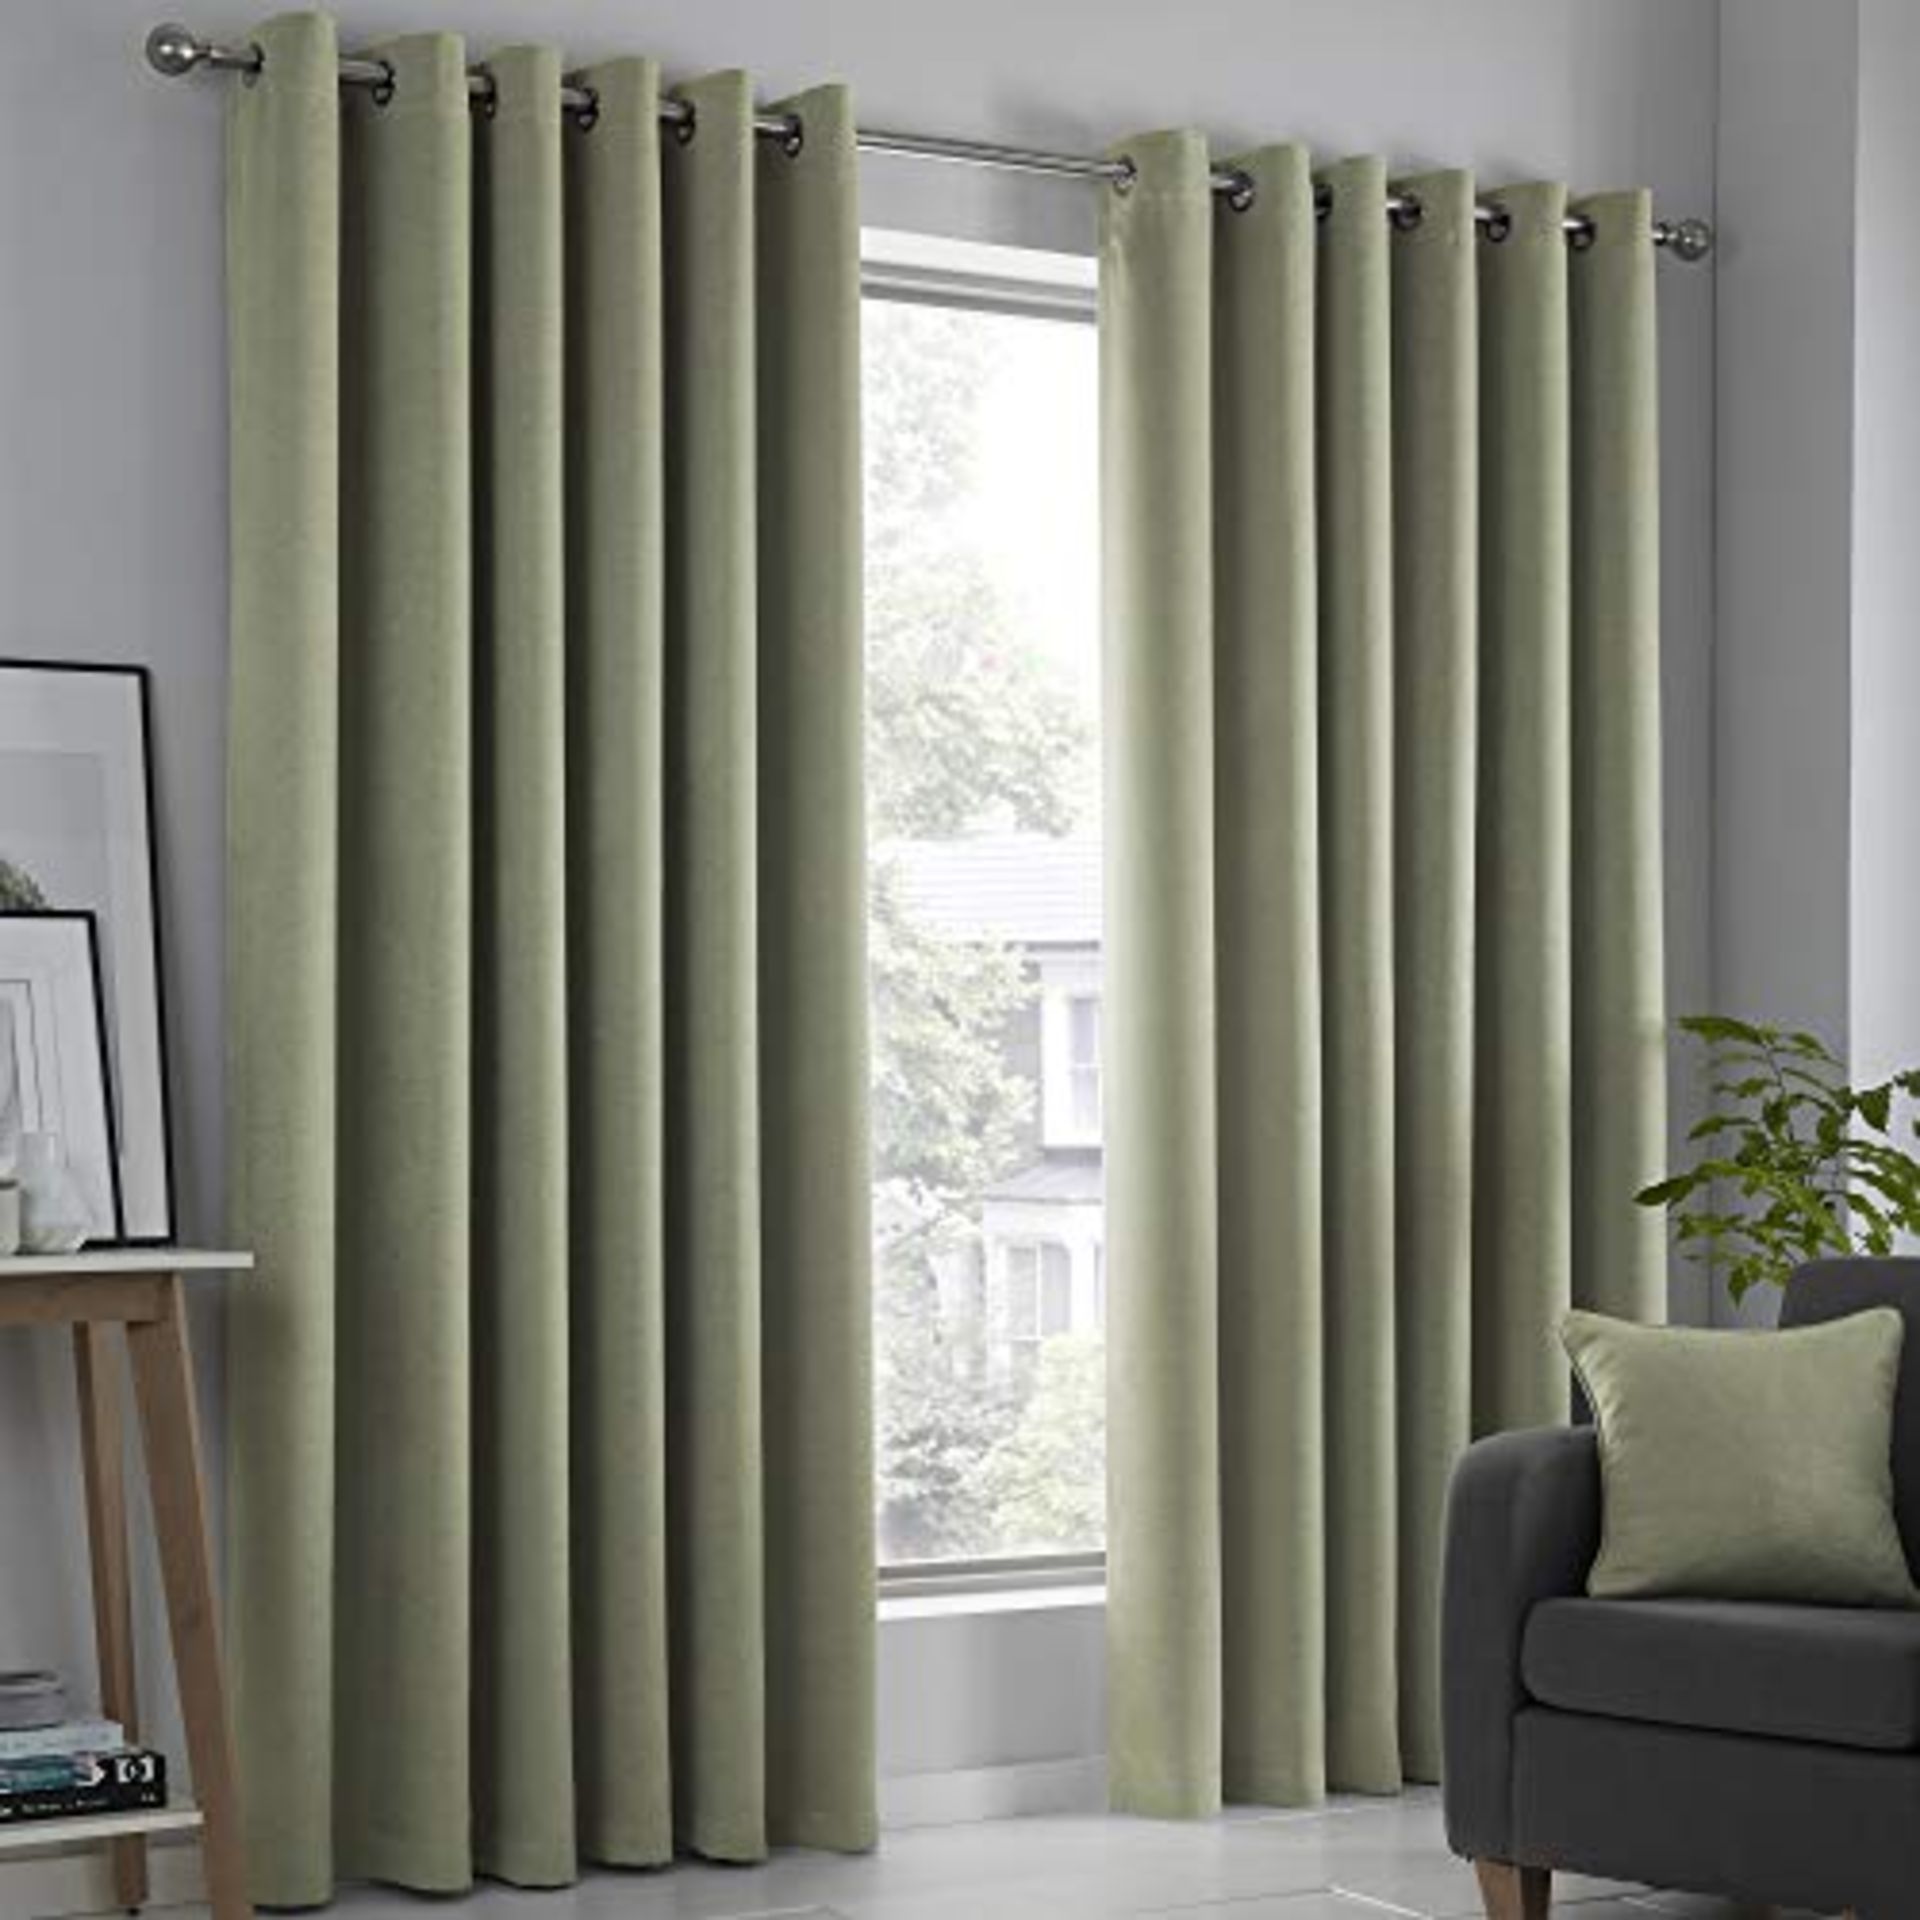 Fusion - Strata - Blockout Pair of Eyelet Curtains - 90" Width x 90" Drop (229 x 229cm